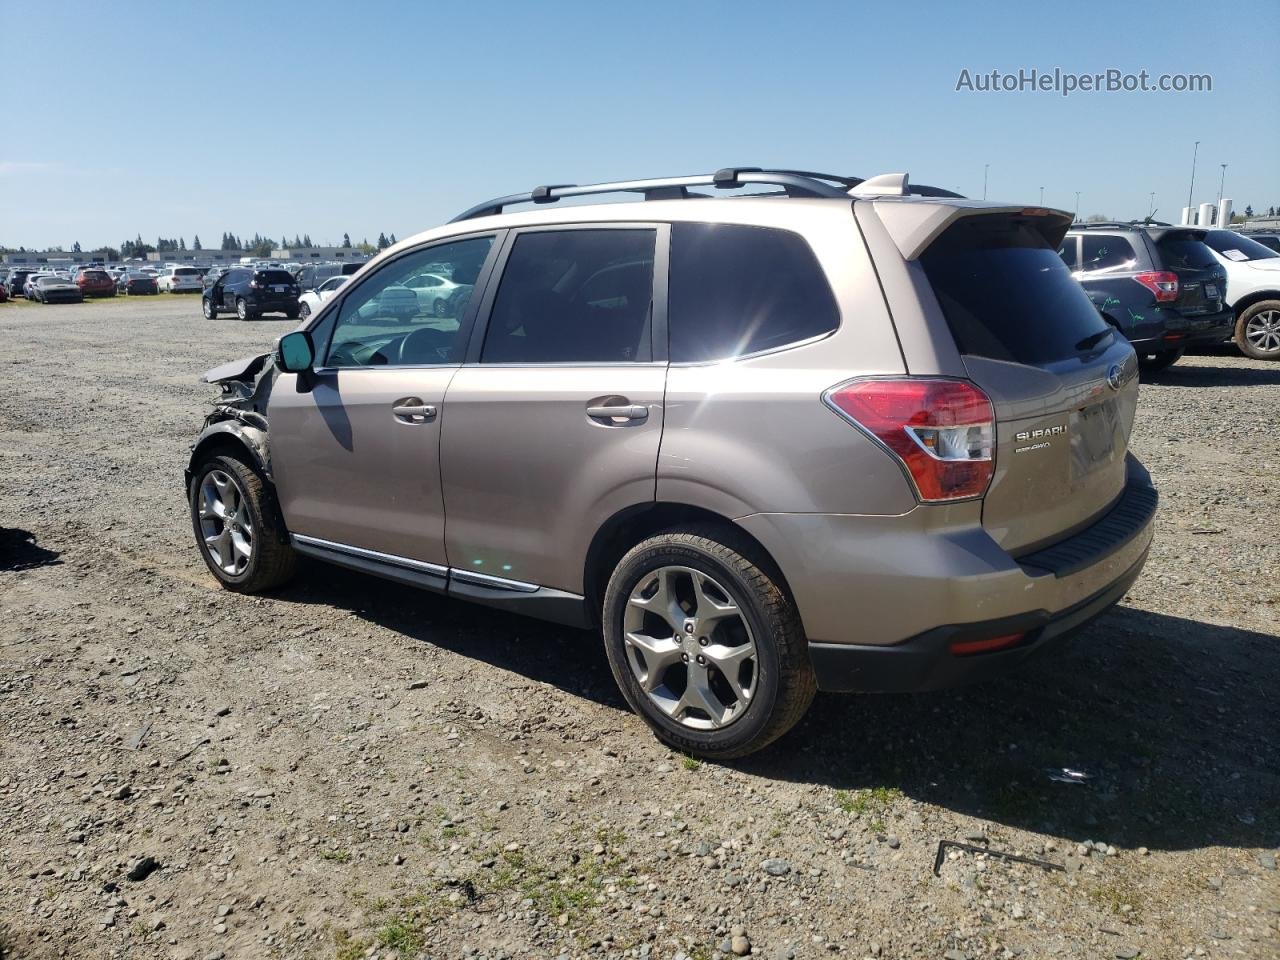 2016 Subaru Forester 2.5i Touring Brown vin: JF2SJAXC4GH470296